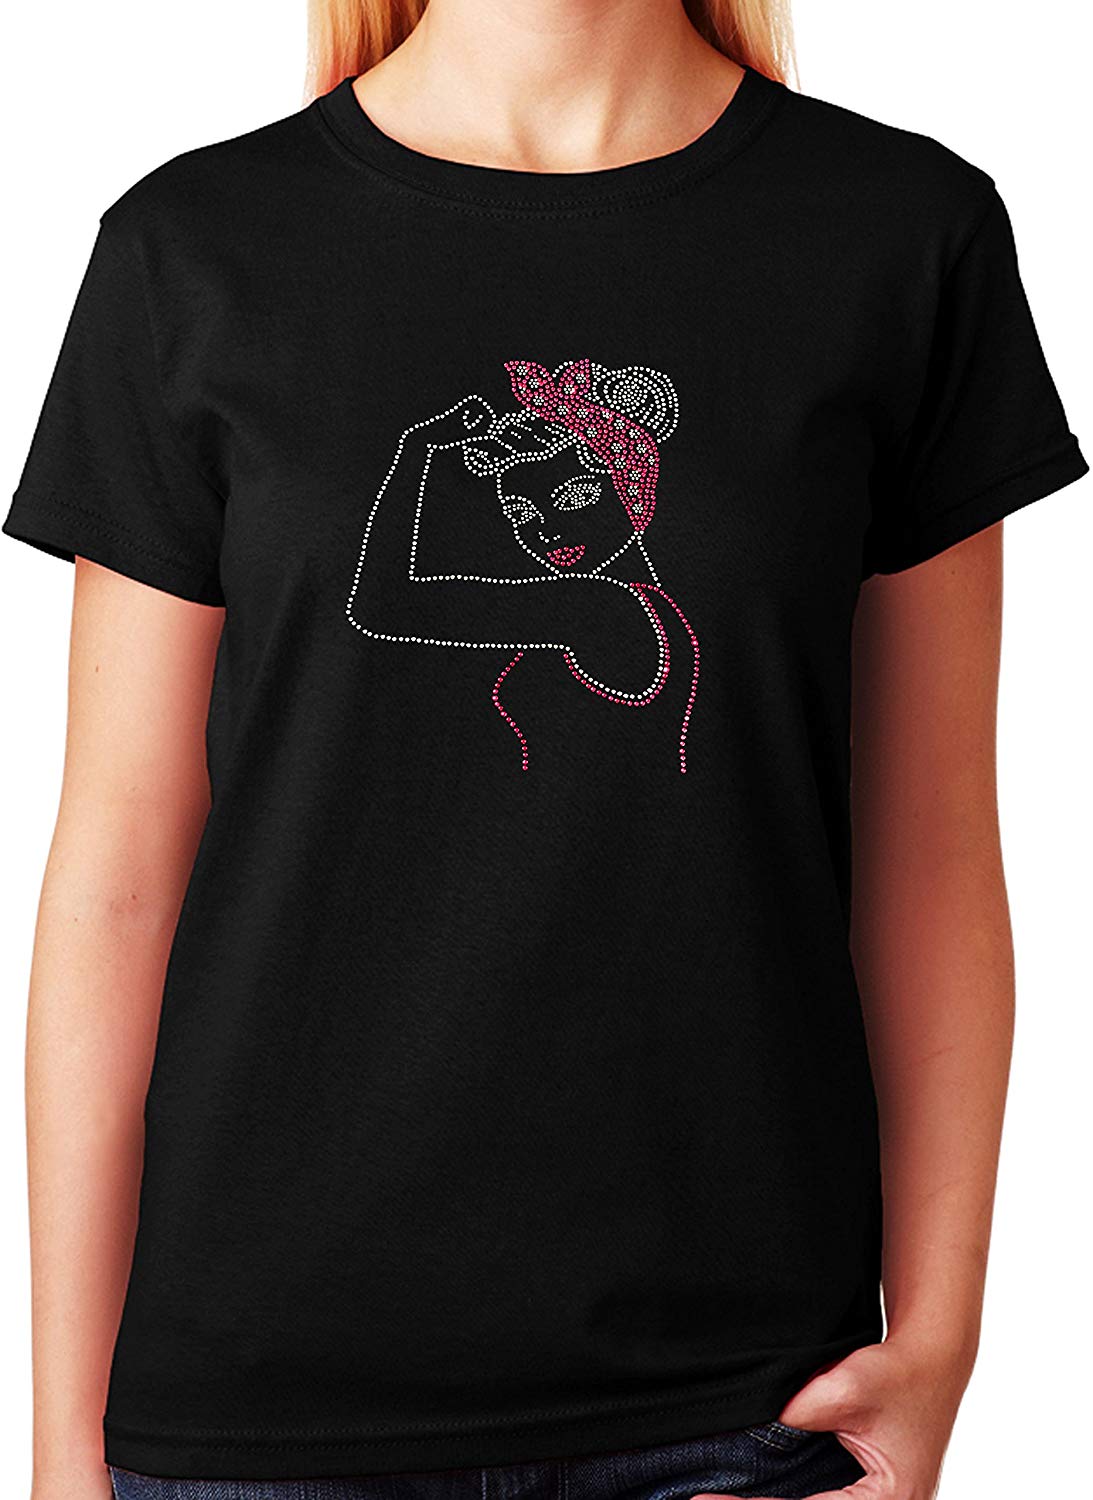 Women's / Unisex T-Shirt with Pink Pin Up Girl In Rhinestones